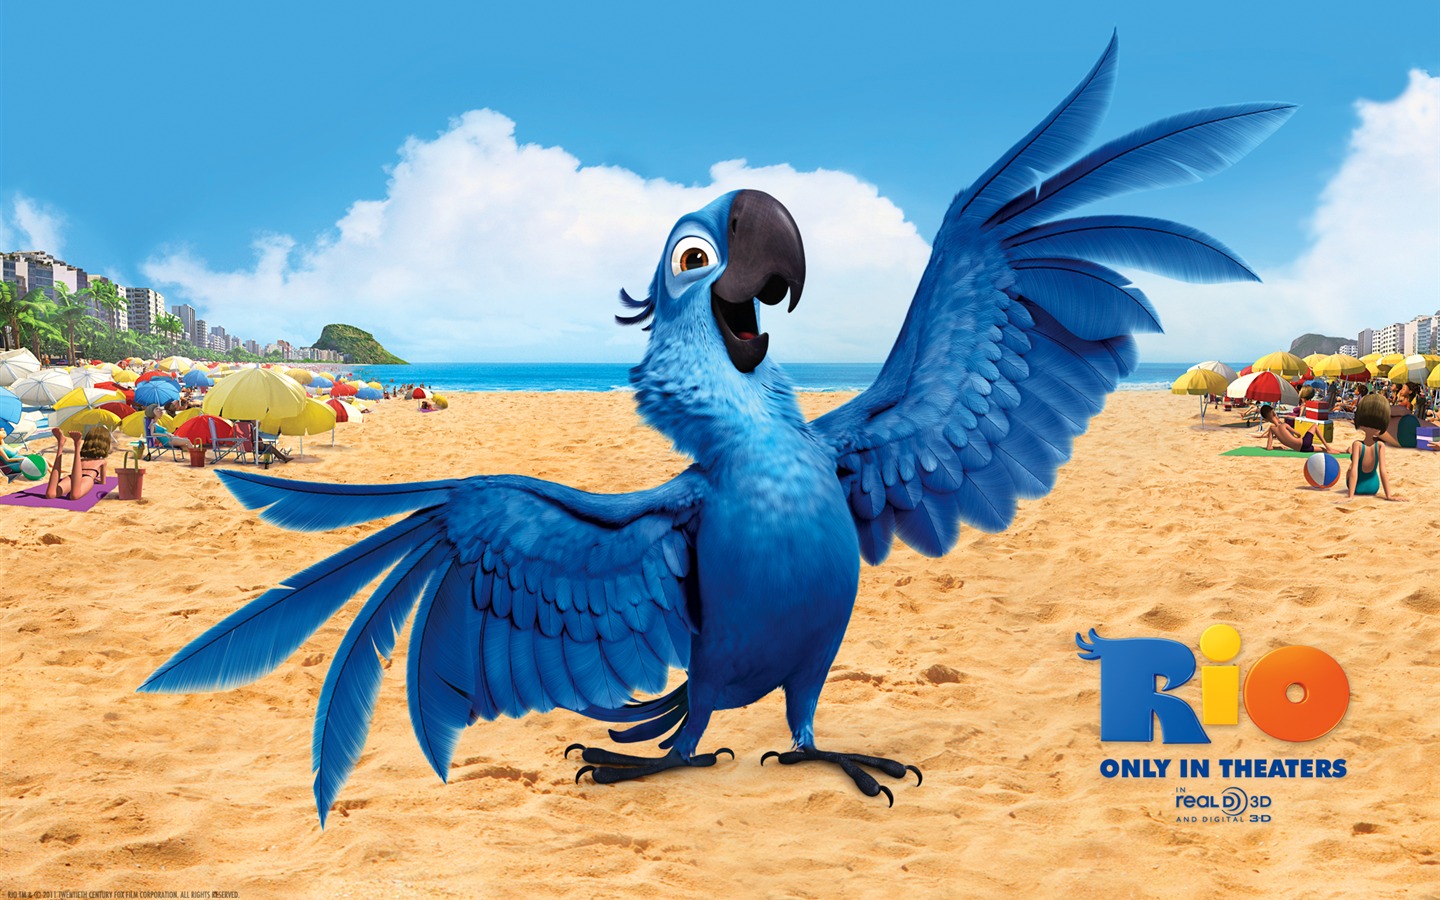 Rio 2011 wallpapers #4 - 1440x900